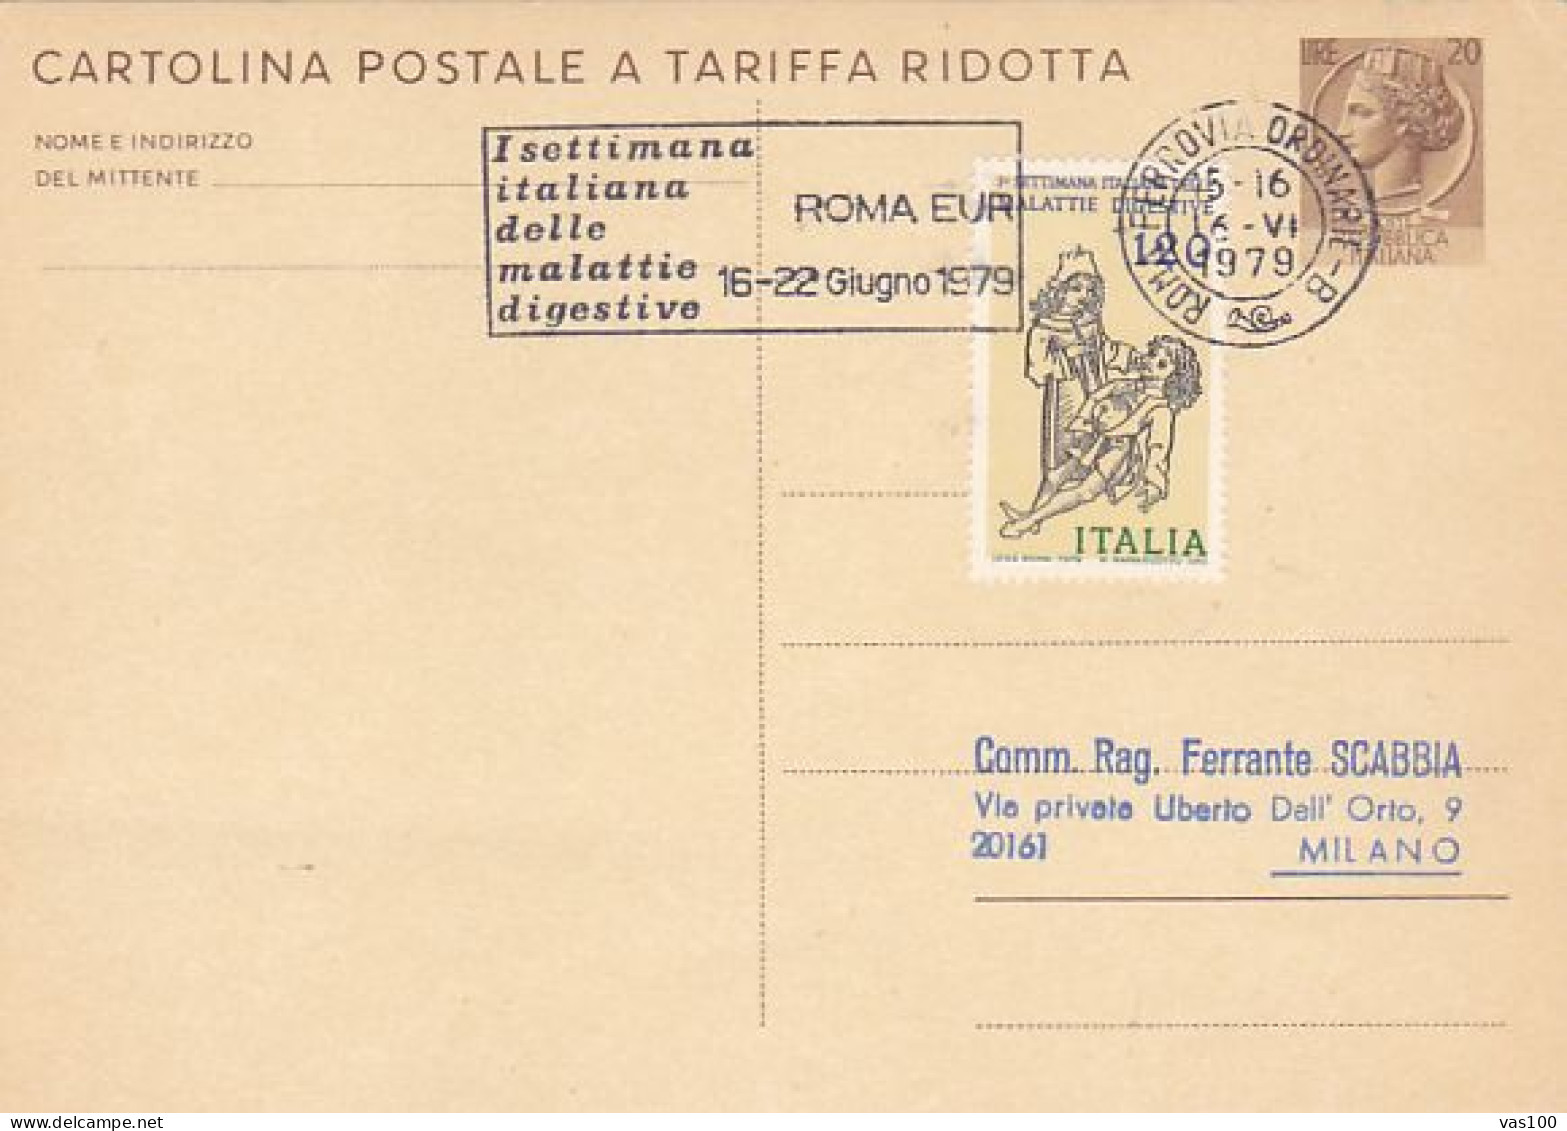 DIGESTIVE DISEASES WEEK STAMP AND SPECIAL POSTMARK ON SYRACUSEAN COIN PC STATIONERY, ENTIER POSTAL, 1979, ITALY - Interi Postali